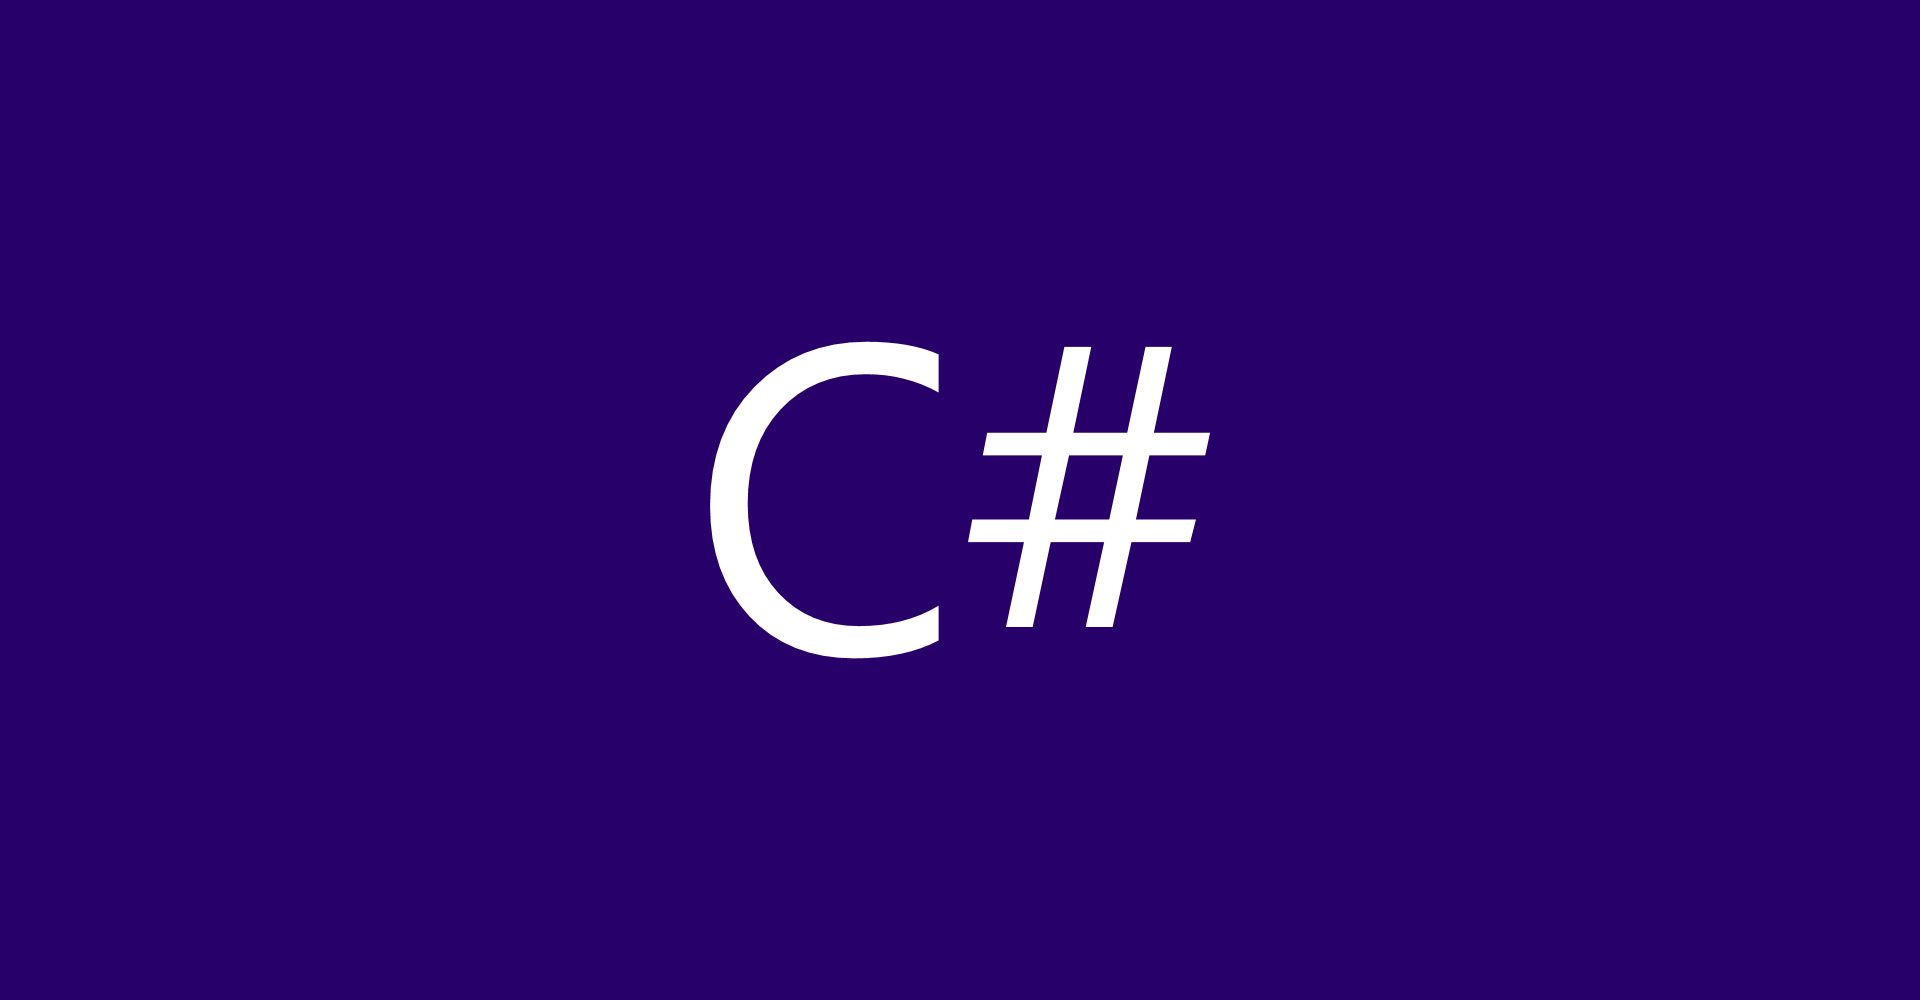 Higher/Lower Game in C#